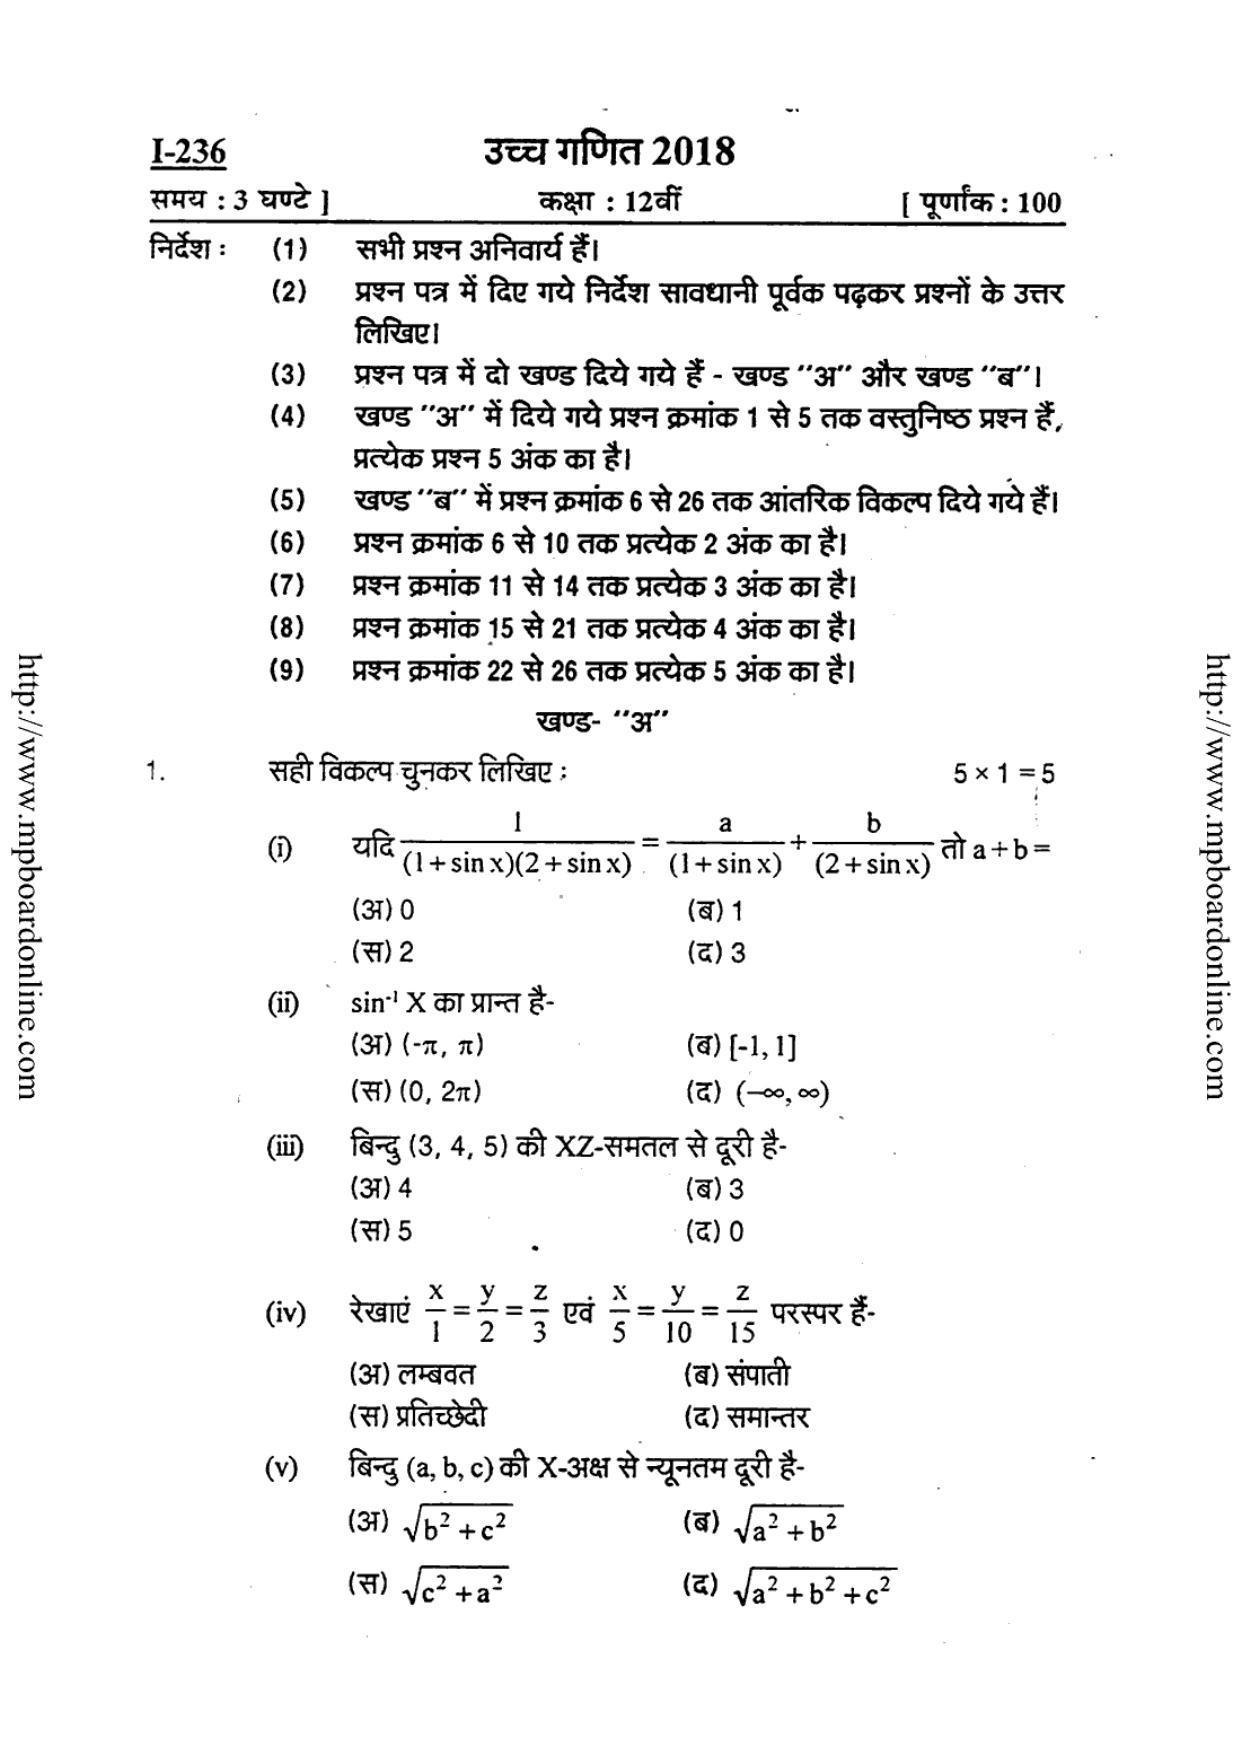 MP Board Class 12 Higher Mathematics 2018 Question Paper - Page 1